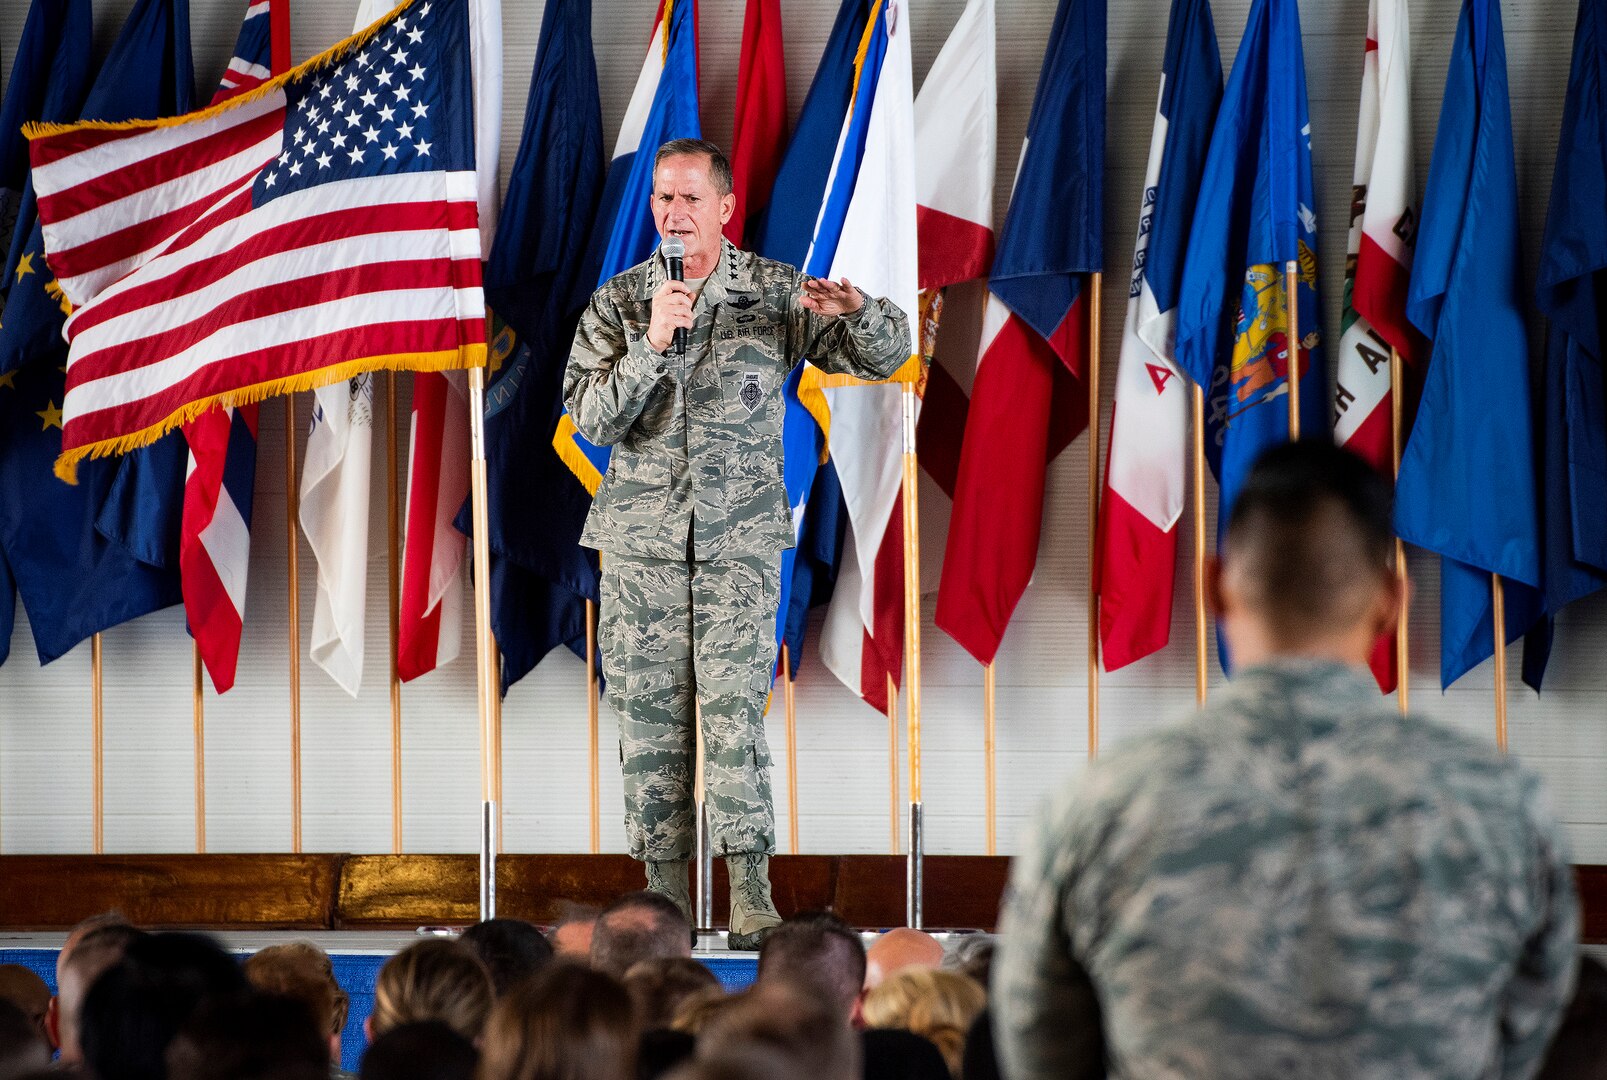 Air Force units across all levels of command are addressing the issues identified by an Air Force-wide operational safety review, initiated this spring by the Air Force Chief of Staff, Gen. David L. Goldfein.